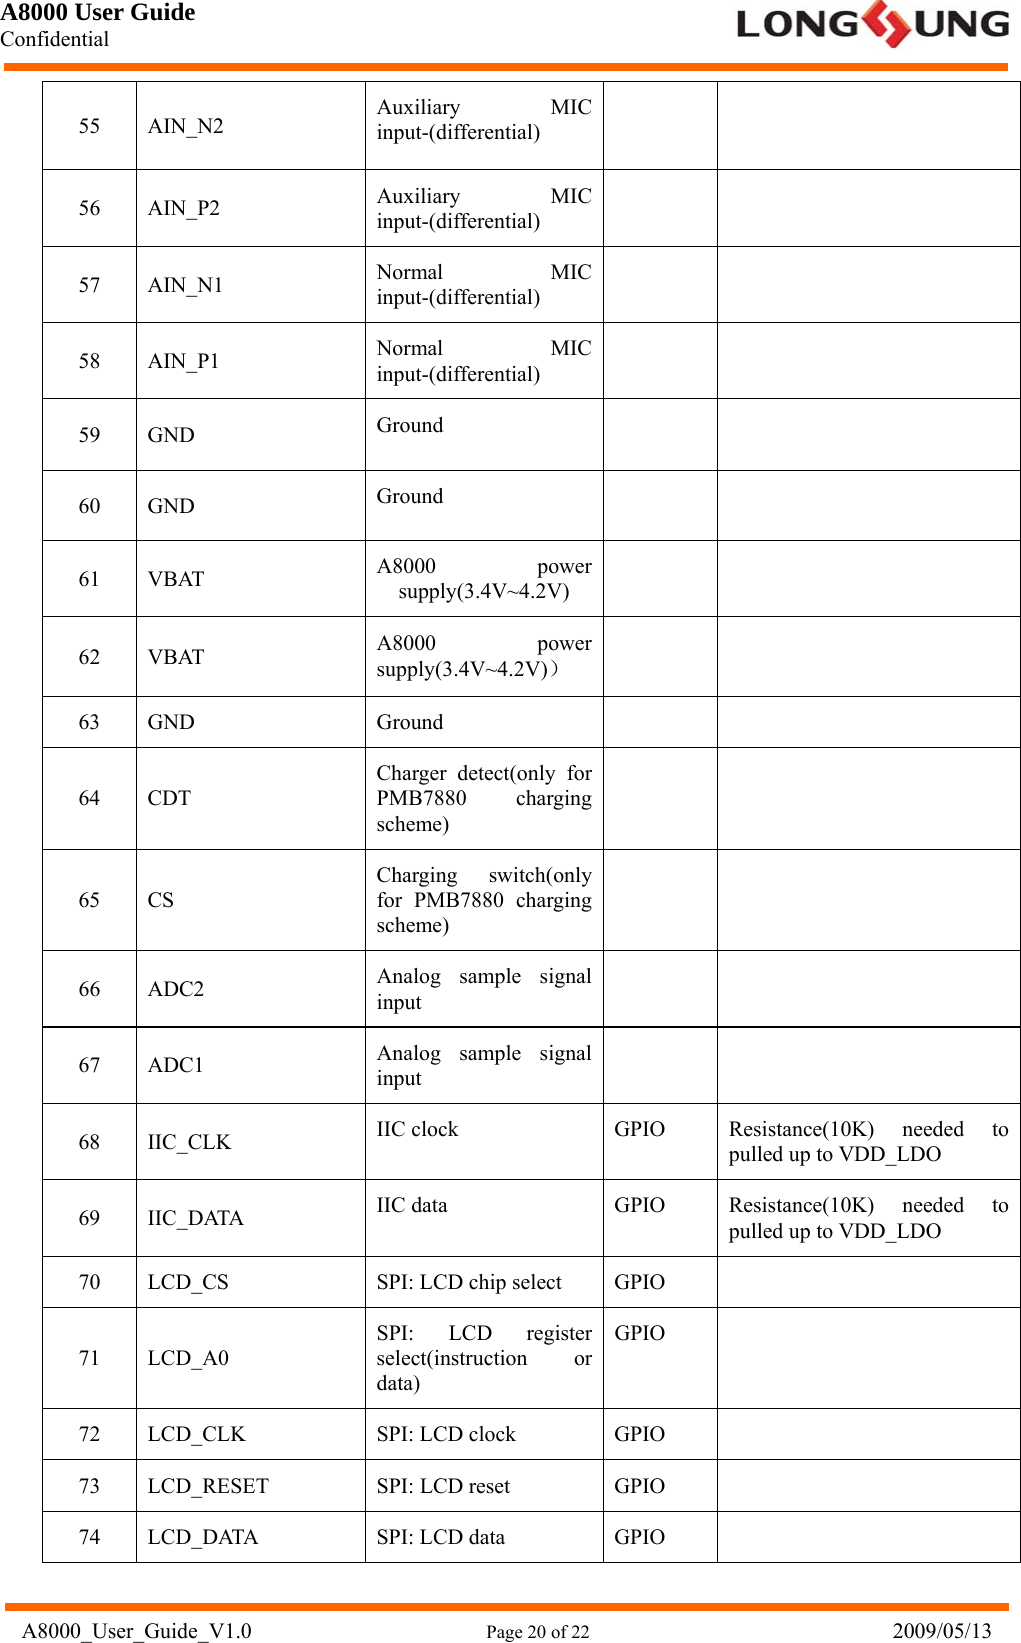 A8000 User Guide Confidential   A8000_User_Guide_V1.0                      Page 20 of 22                            2009/05/13 55 AIN_N2  Auxiliary MIC input-(differential)   56 AIN_P2  Auxiliary MIC input-(differential)   57 AIN_N1  Normal MIC input-(differential)   58 AIN_P1  Normal MIC input-(differential)   59 GND  Ground   60 GND  Ground   61 VBAT  A8000 power supply(3.4V~4.2V)   62 VBAT  A8000 power supply(3.4V~4.2V)）   63 GND  Ground     64 CDT Charger detect(only for PMB7880 charging scheme)    65 CS Charging switch(only for PMB7880 charging scheme)   66 ADC2  Analog sample signal input   67 ADC1  Analog sample signal input   68 IIC_CLK  IIC clock  GPIO  Resistance(10K) needed to pulled up to VDD_LDO 69 IIC_DATA  IIC data  GPIO  Resistance(10K) needed to pulled up to VDD_LDO 70  LCD_CS  SPI: LCD chip select  GPIO   71 LCD_A0 SPI: LCD register select(instruction or data) GPIO  72  LCD_CLK  SPI: LCD clock  GPIO   73  LCD_RESET  SPI: LCD reset  GPIO   74  LCD_DATA  SPI: LCD data  GPIO   